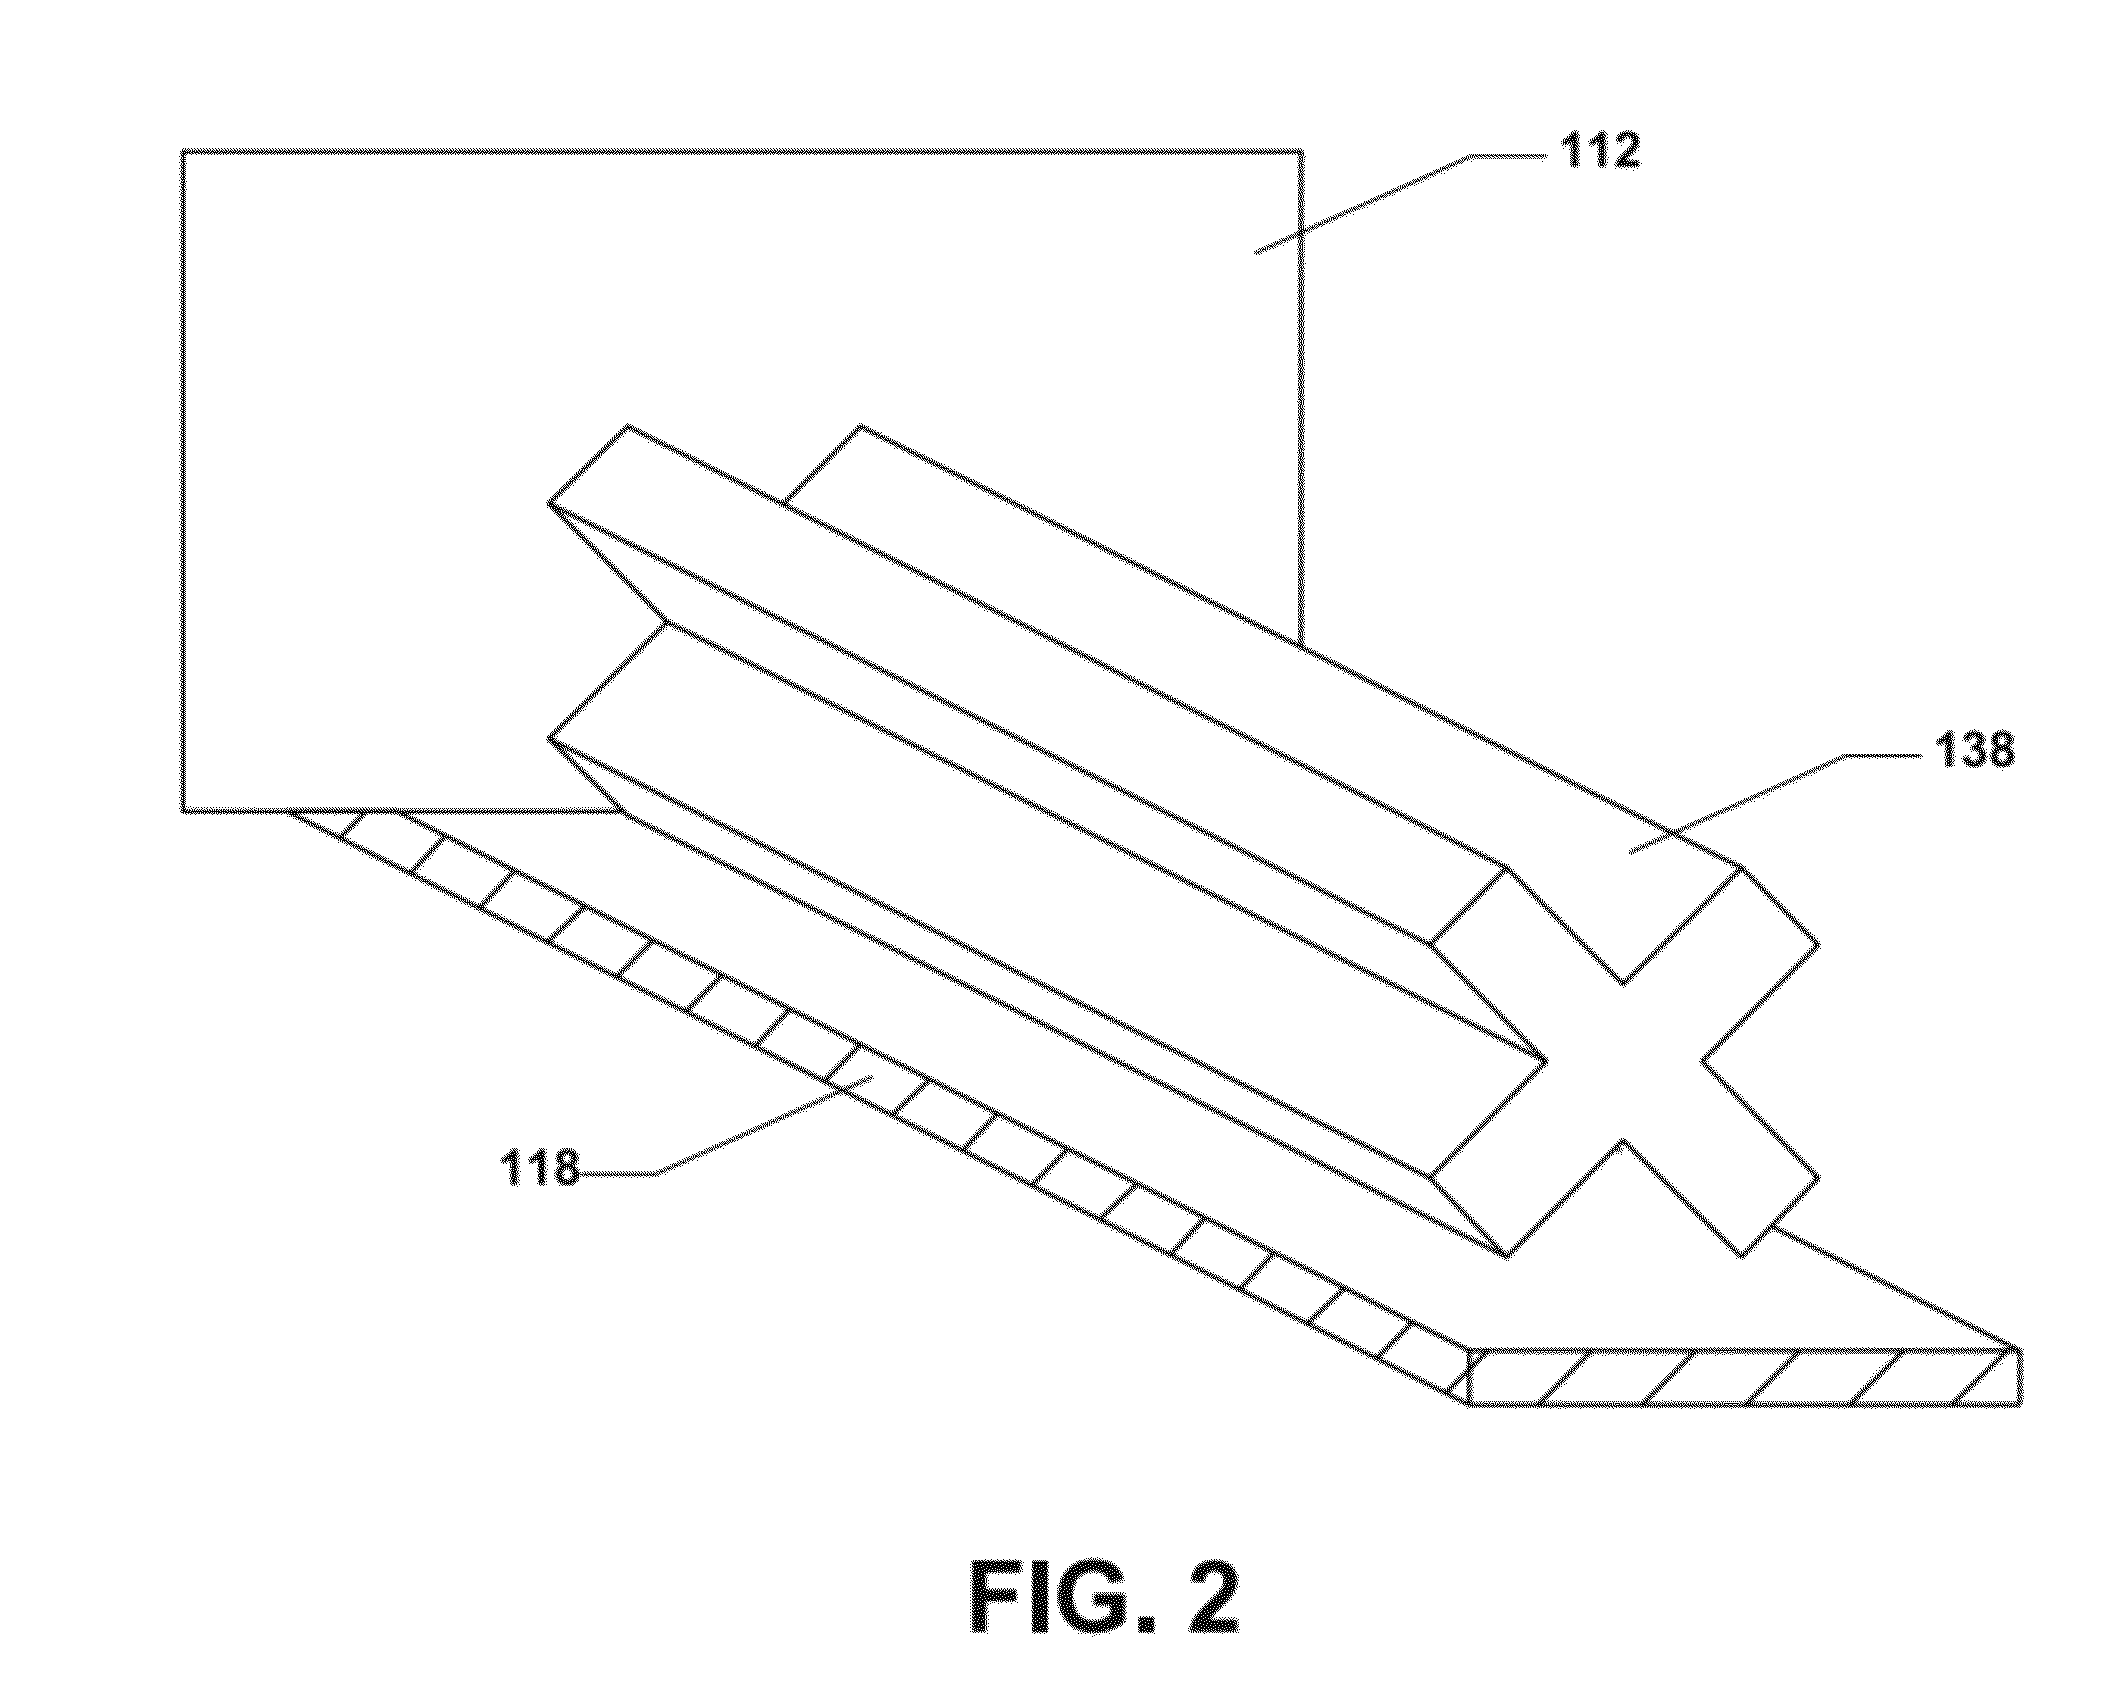 Method of forming a shaped abrasive particle